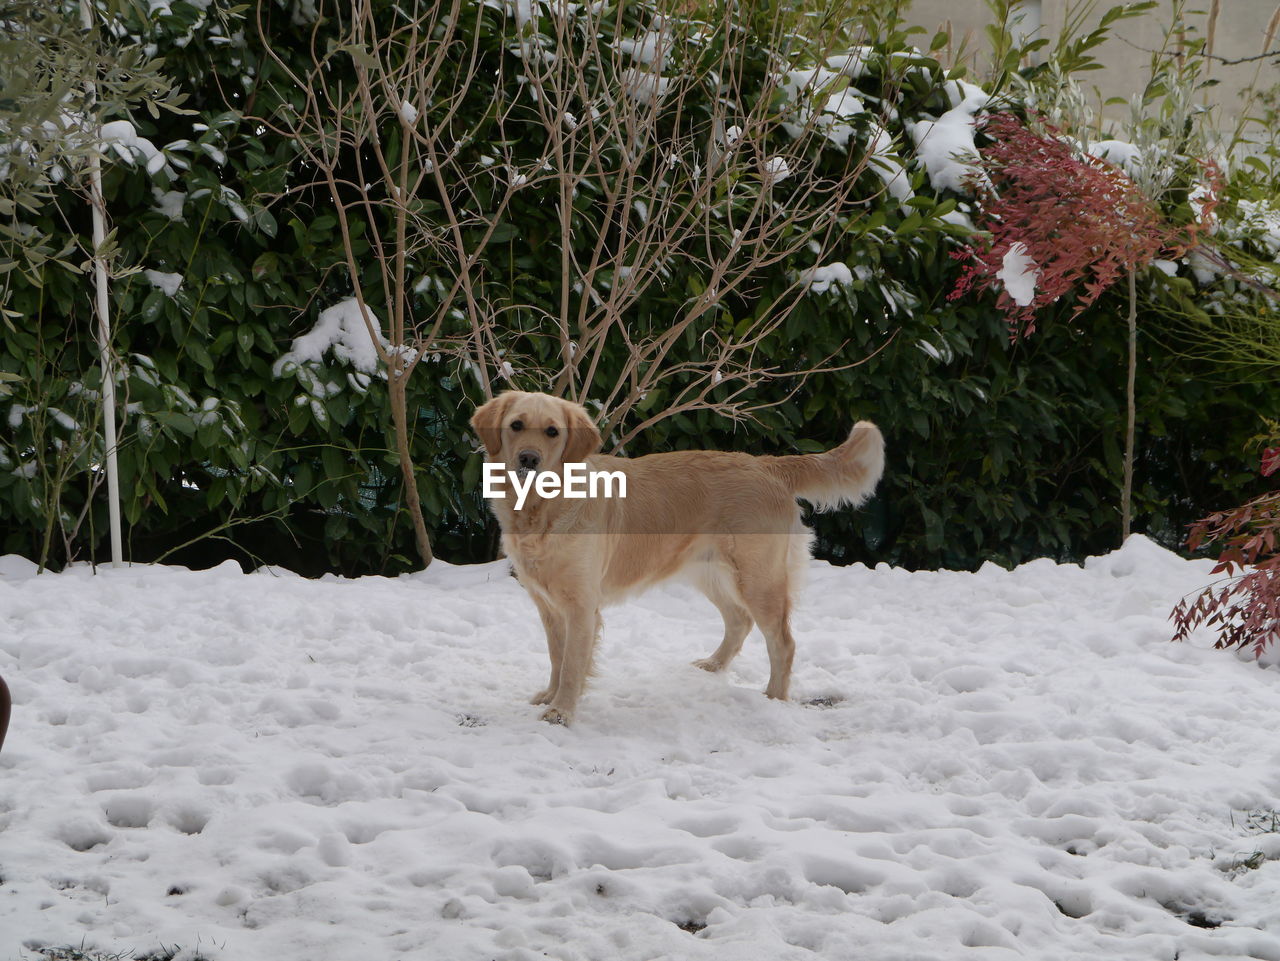 DOG IN A SNOW